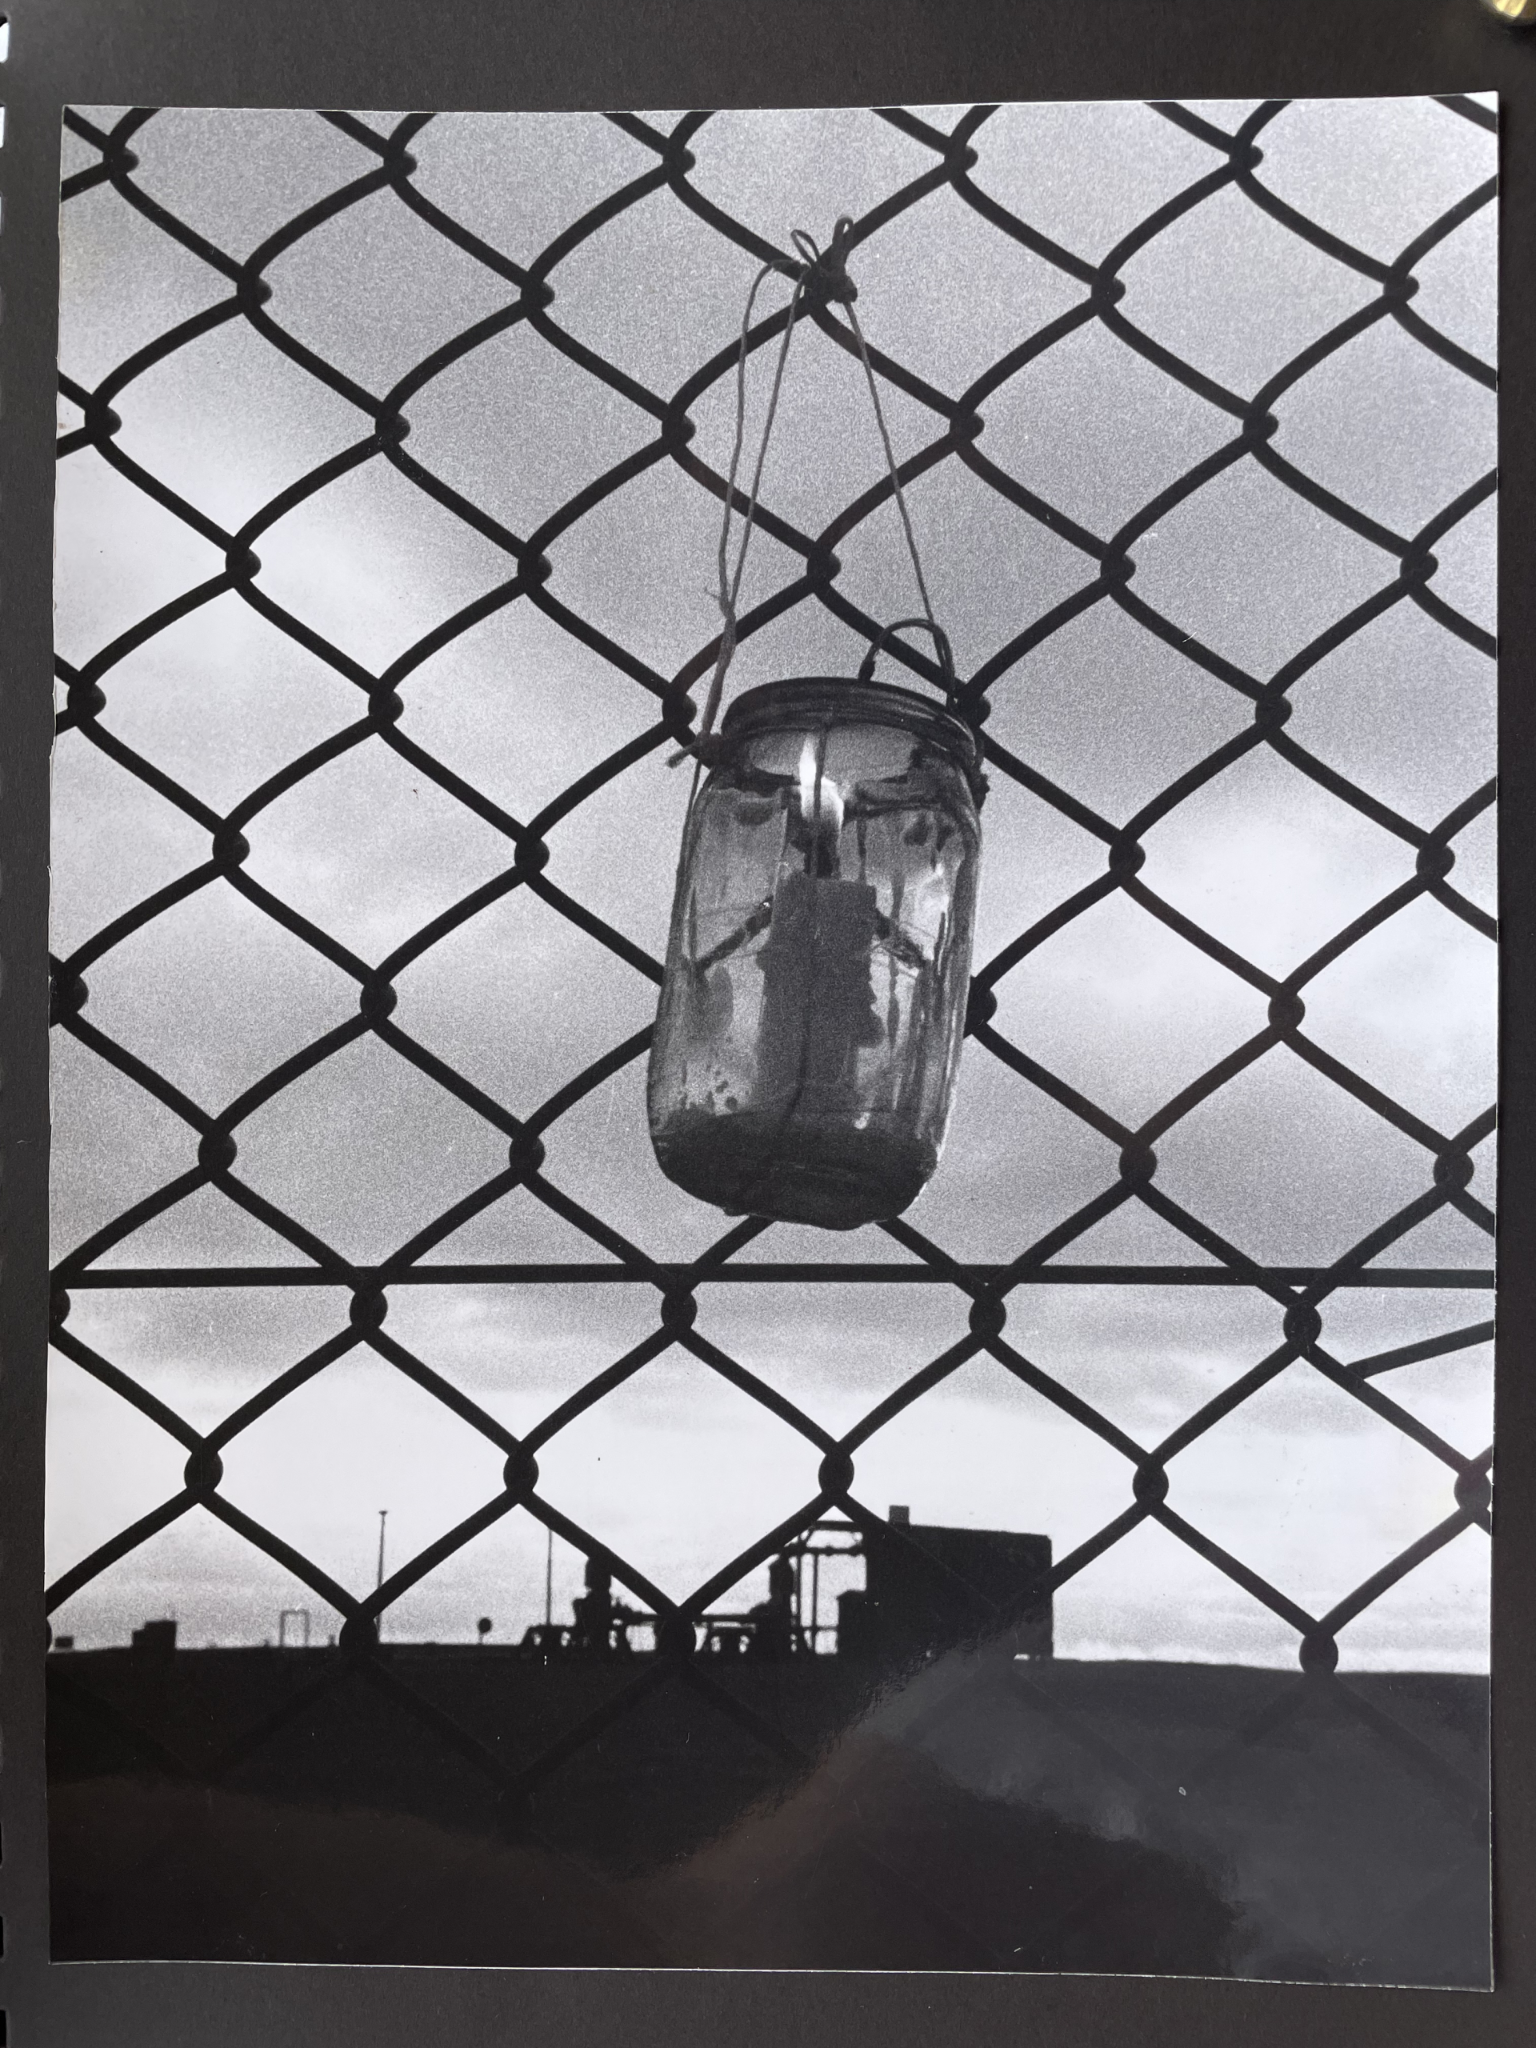 Scrapbook page with black and white photo in portrait orientation. Photo shows a jar containing a burning candle. The jar hangs from string tied to a chain-link fence. Through the fence, the view is mostly sky, with the shape of military buildings seen as silhouettes at the bottom of the image.